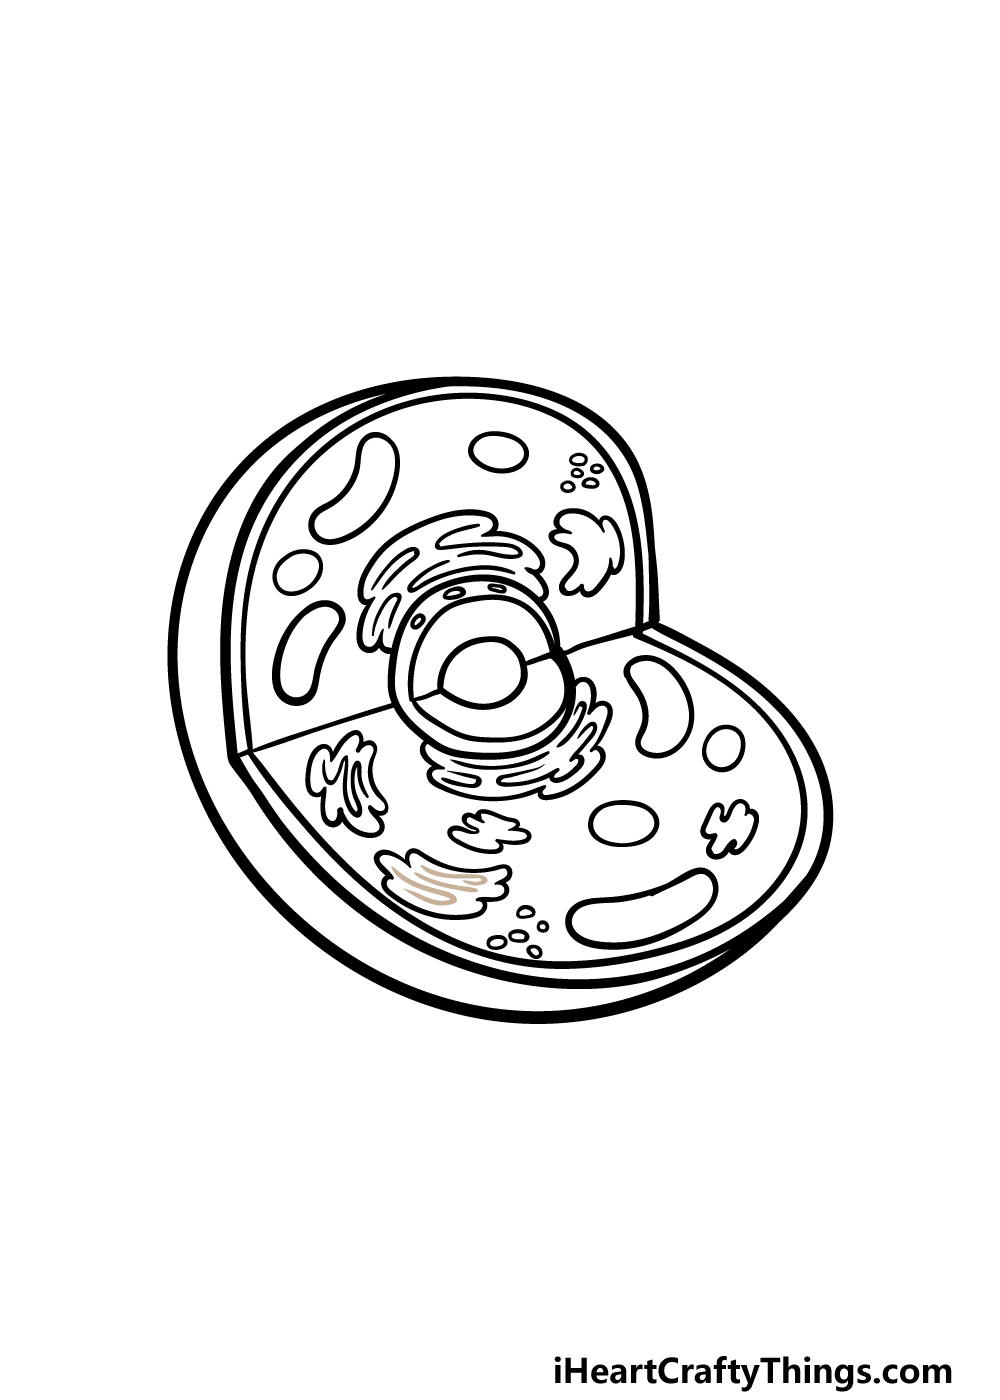 Animal Cell Drawing - How To Draw An Animal Cell Step By Step